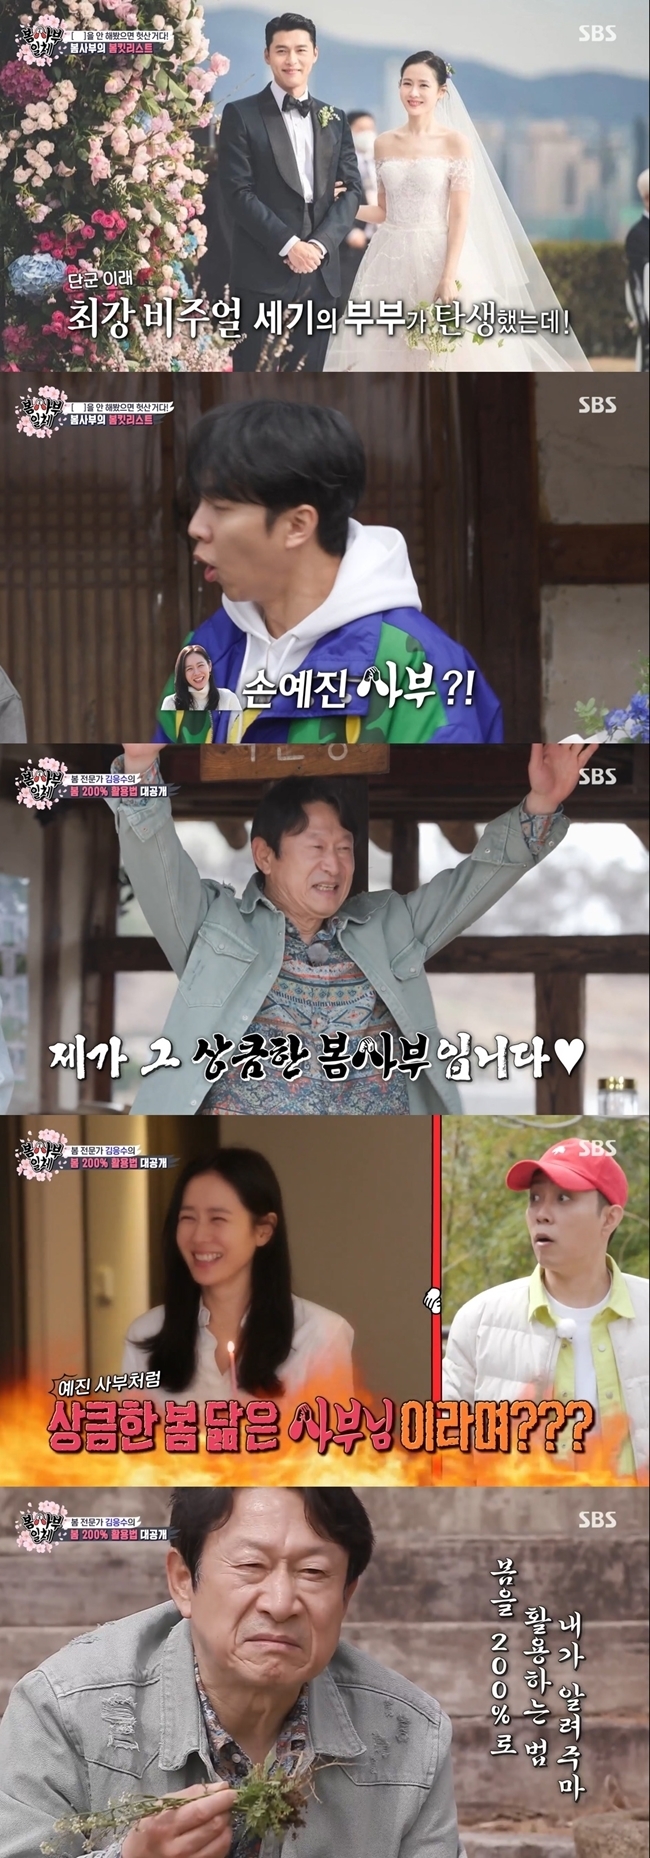 Kim Eung-soo, not actor Son Ye-jin, appeared as a master and expressed regret.On April 17, SBS All The Butlers, Kim Eung-soo appeared as Master and Monster X Juheon as a daily student.The production team said, Today, the master is a master who resembles spring. What the fresh master prepared is a spring kit list that must be done before he dies.If you have never done this, it is like a waste. Son Ye-jin has previously appeared on All The Butlers and revealed his desire to reappear.Yang said, There is a person who thinks that he is a master who resembles spring. He recalled Son Ye-jin, and Lee Seung-gi also expected Son Ye-jin.The members went to meet the master with excitement and expectation, but it was Kim Eung-soo, not Son Ye-jin, who welcomed the members.Eun Ji-won looked at Kim Eung-soo and his daily disciple, Juheon, and said, Who is your master? There are only two daily disciples. Is not he a refreshing master?Lee Seung-gi also laughed, asking, Is not it Son Ye-jin sister?